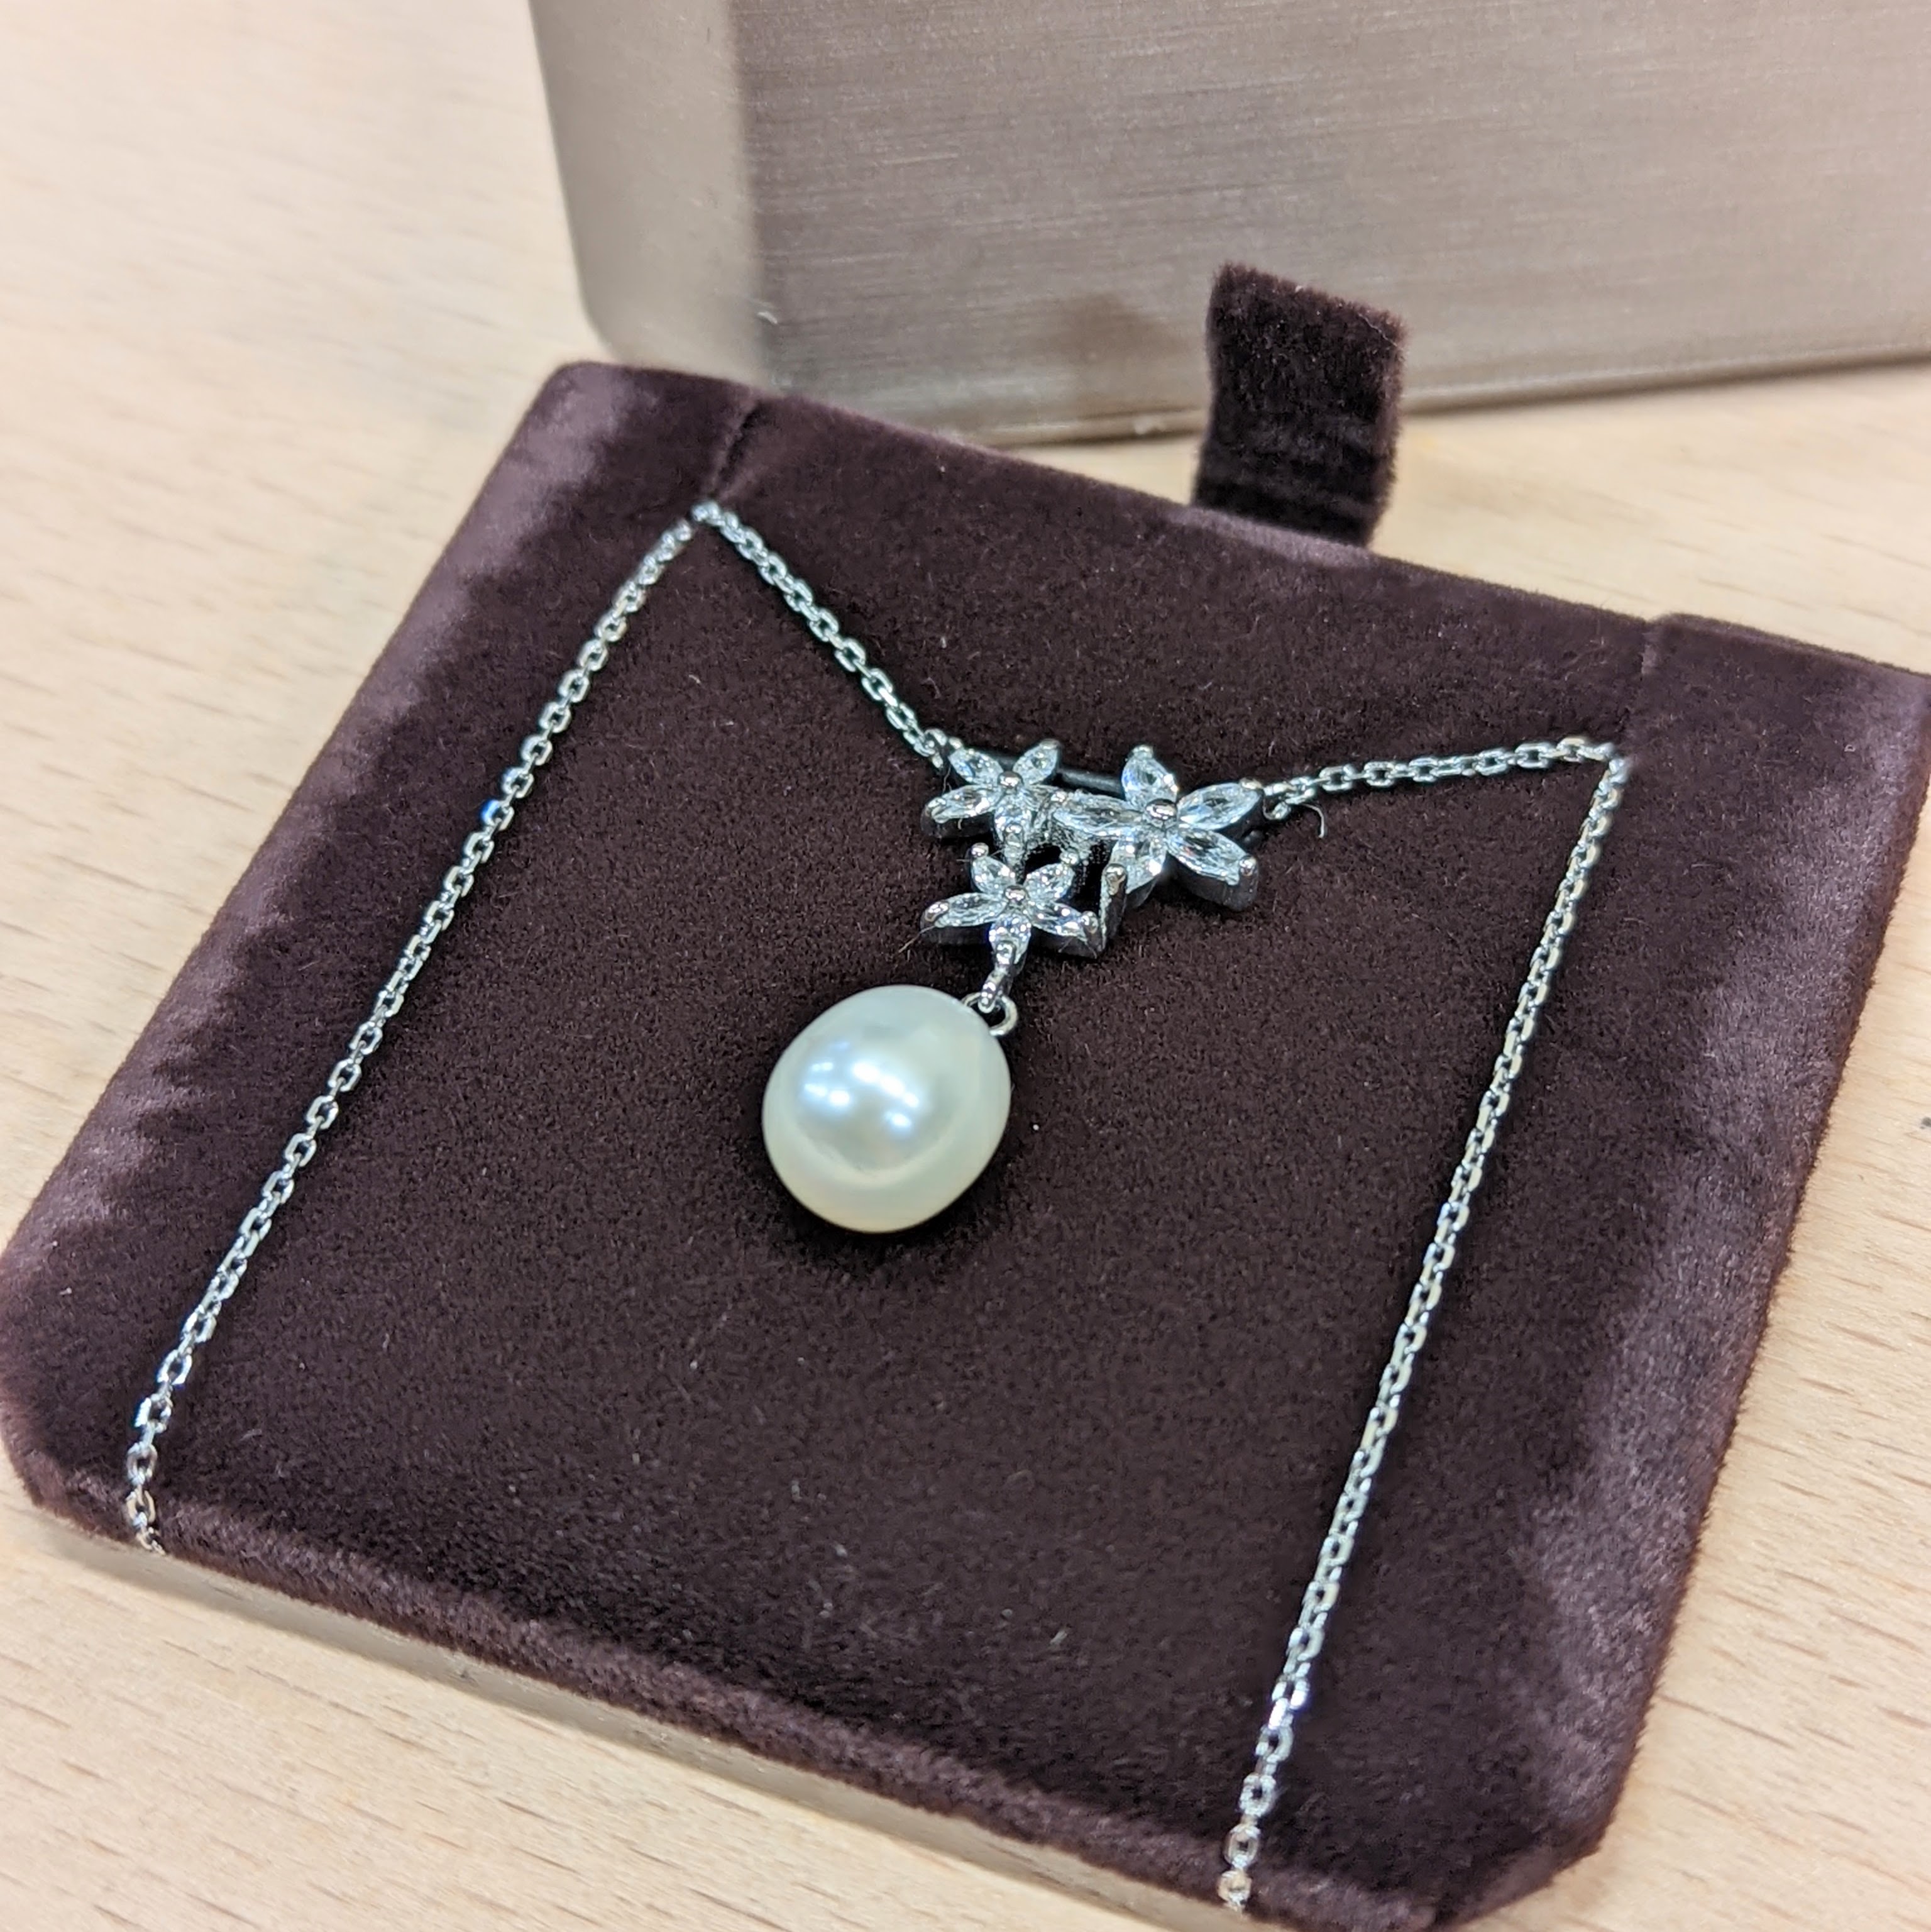 Necklace in box, side view